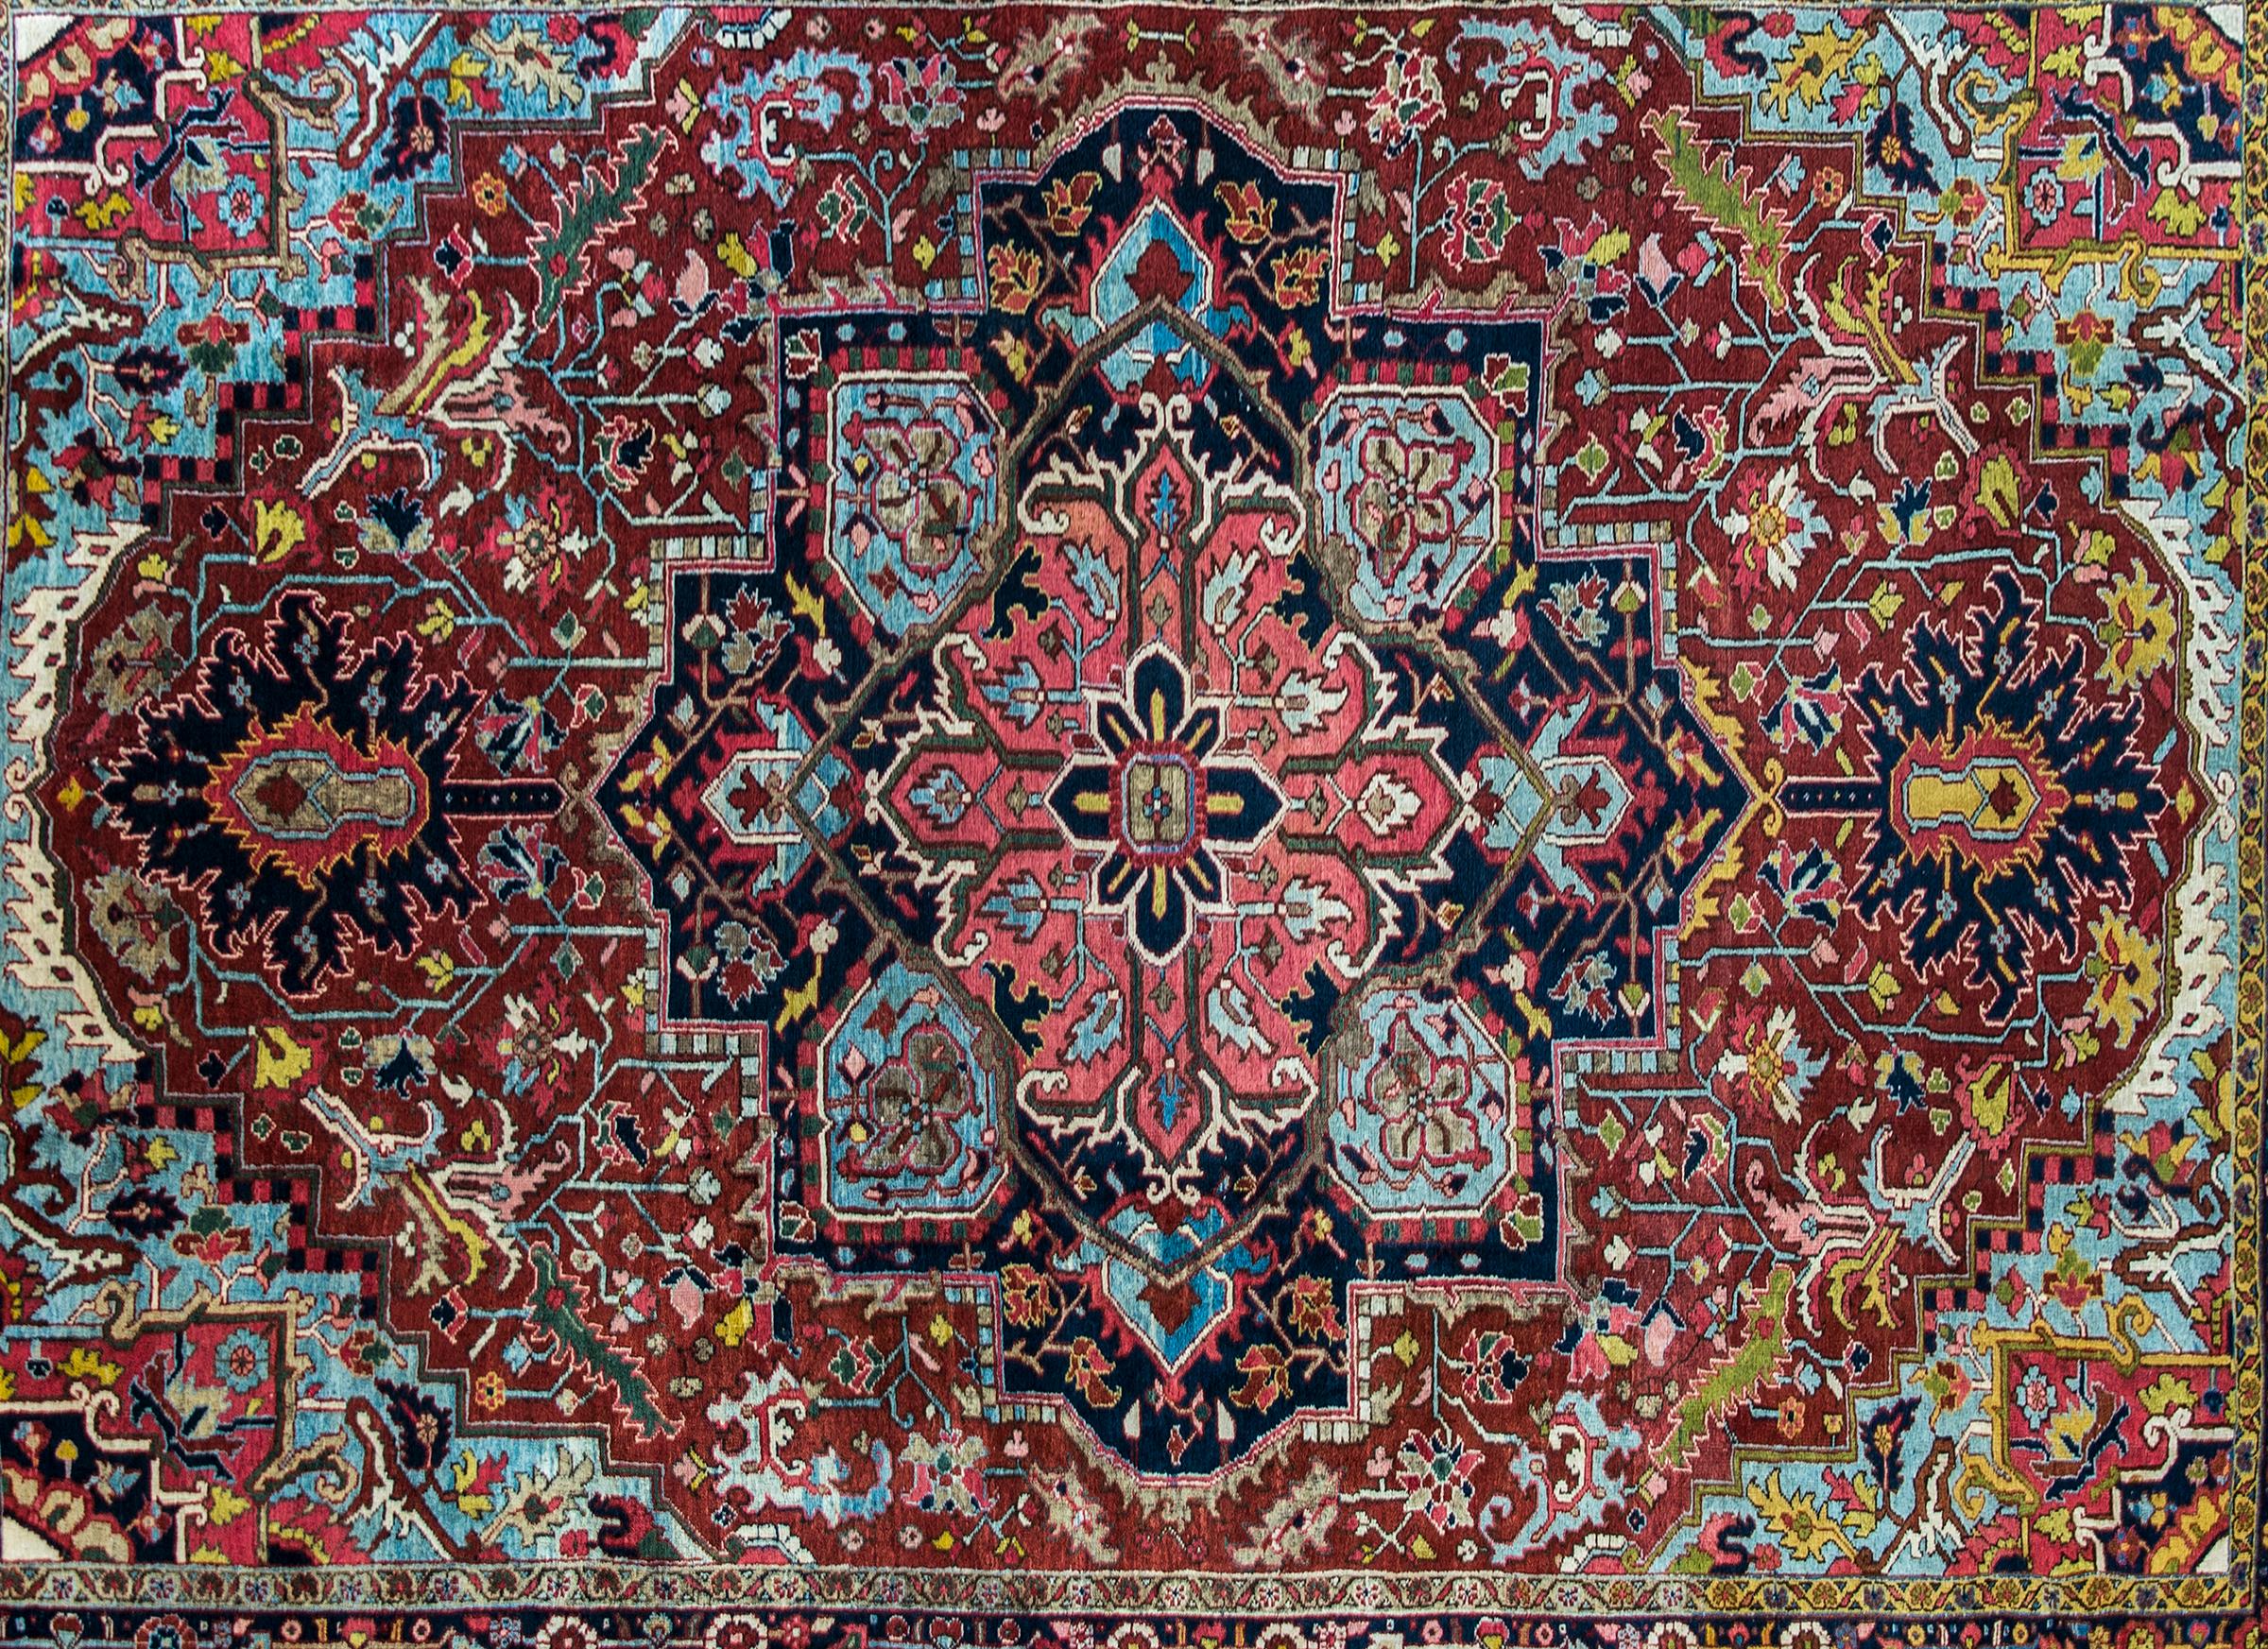 A gorgeous early 20th century Persian Heriz rug with a fantastic large eight-lobed floral medallion, living amidst a field of scrolling vines and leaves, surrounded by a complex wide floral and leaf border, and all woven in myriad colors including